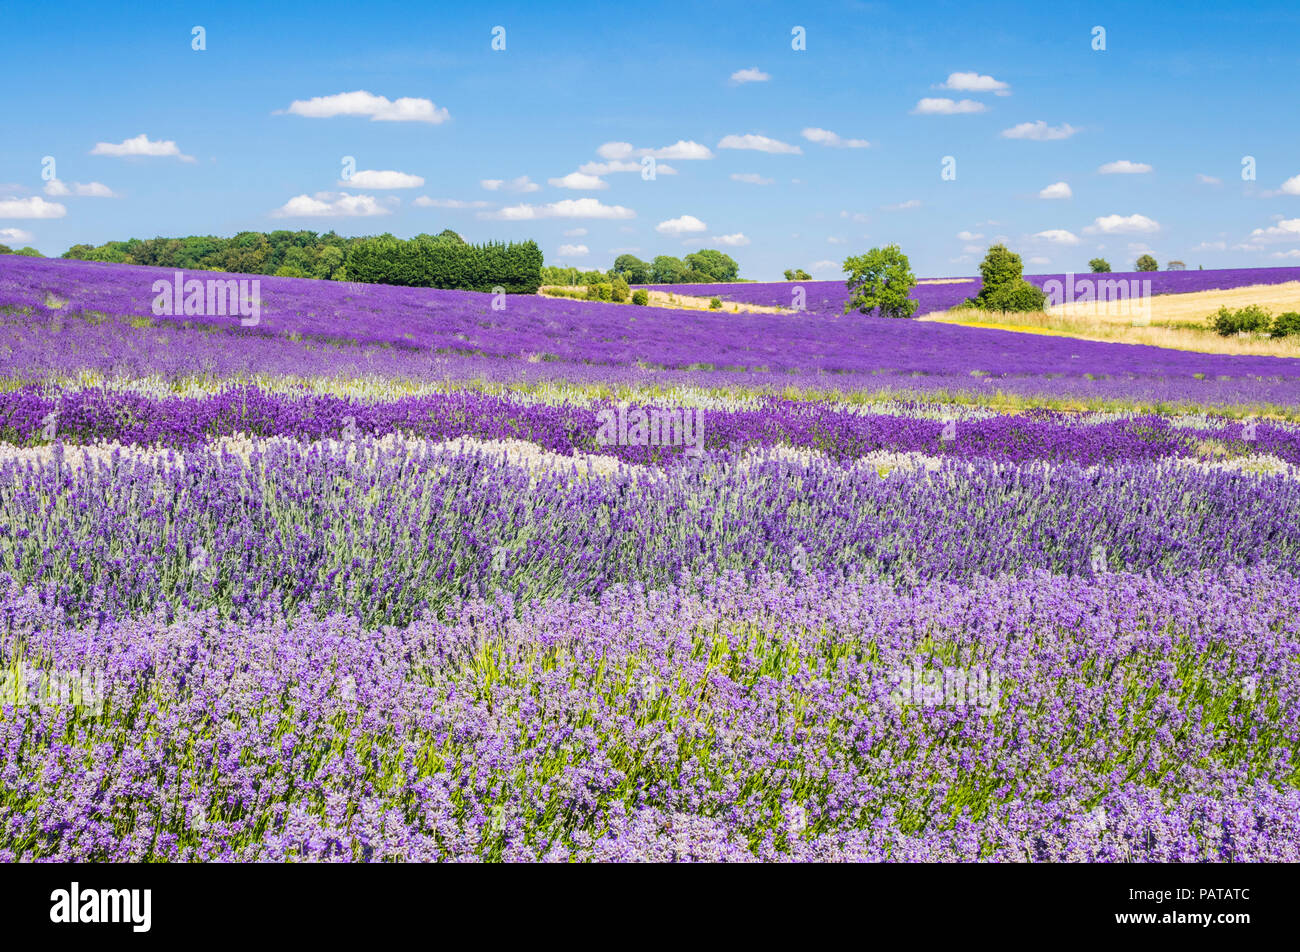 lavender Rows of lavender in a lavender field at Cotswold lavender Snowshill broadway the Cotswolds Gloucestershire England UK GB Europe Stock Photo